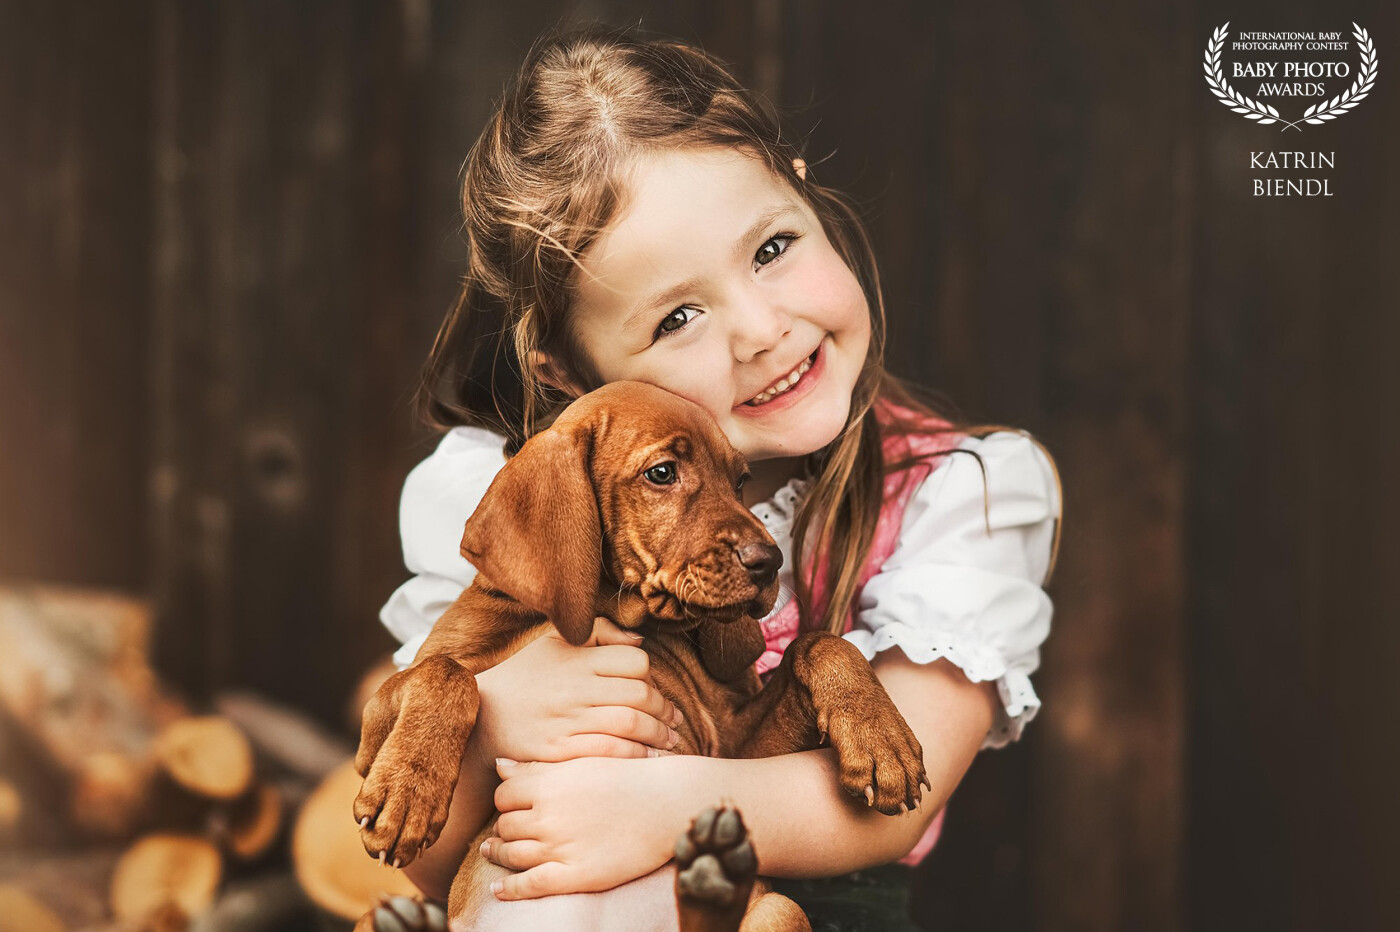 In Bavaria we have a traditional costume which is called "Dirndl". This little girl wear such a Dirndl. I think she have a cute smiley and loves her puppy a lot.